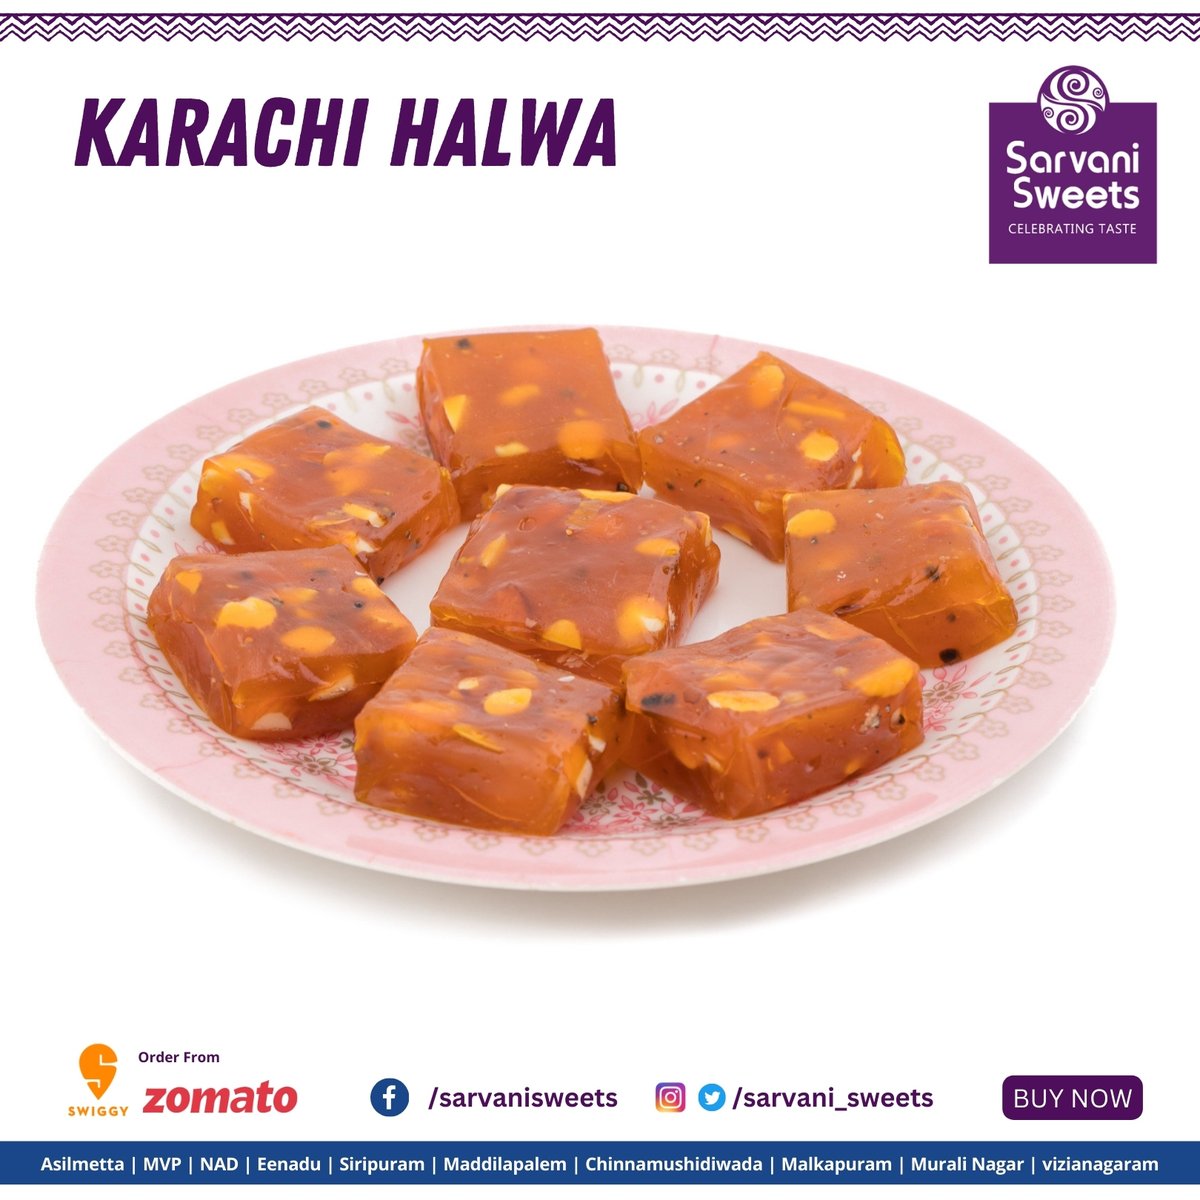 Karachi halwa is a delightful South Asian dessert with a rich history. This melt-in-your-mouth sweet is made with simple ingredients but delivers a complex flavour and texture.

@Sarvani_Sweets

#karachihalwa #sweets #indiansweets #yummy #traditionalsweets #sarvanisweets #tasty